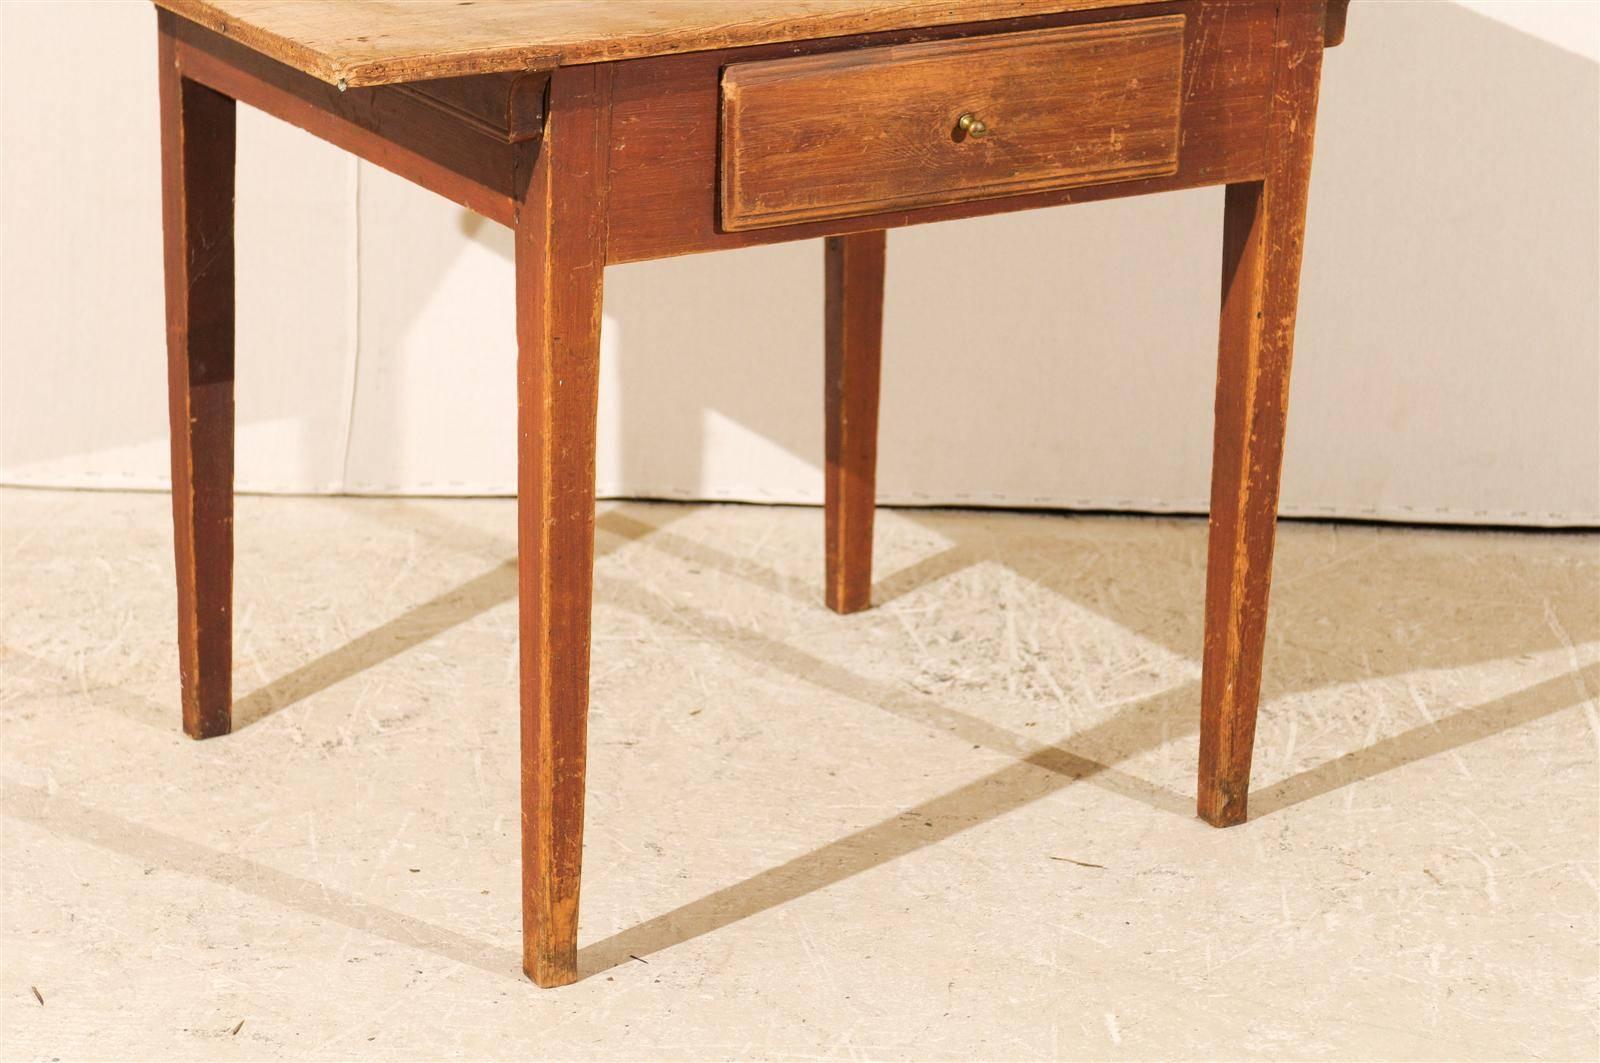 Patinated Swedish Single-Drawer Wooden Table, Clean and Simple Lines, Mid-19th Century For Sale